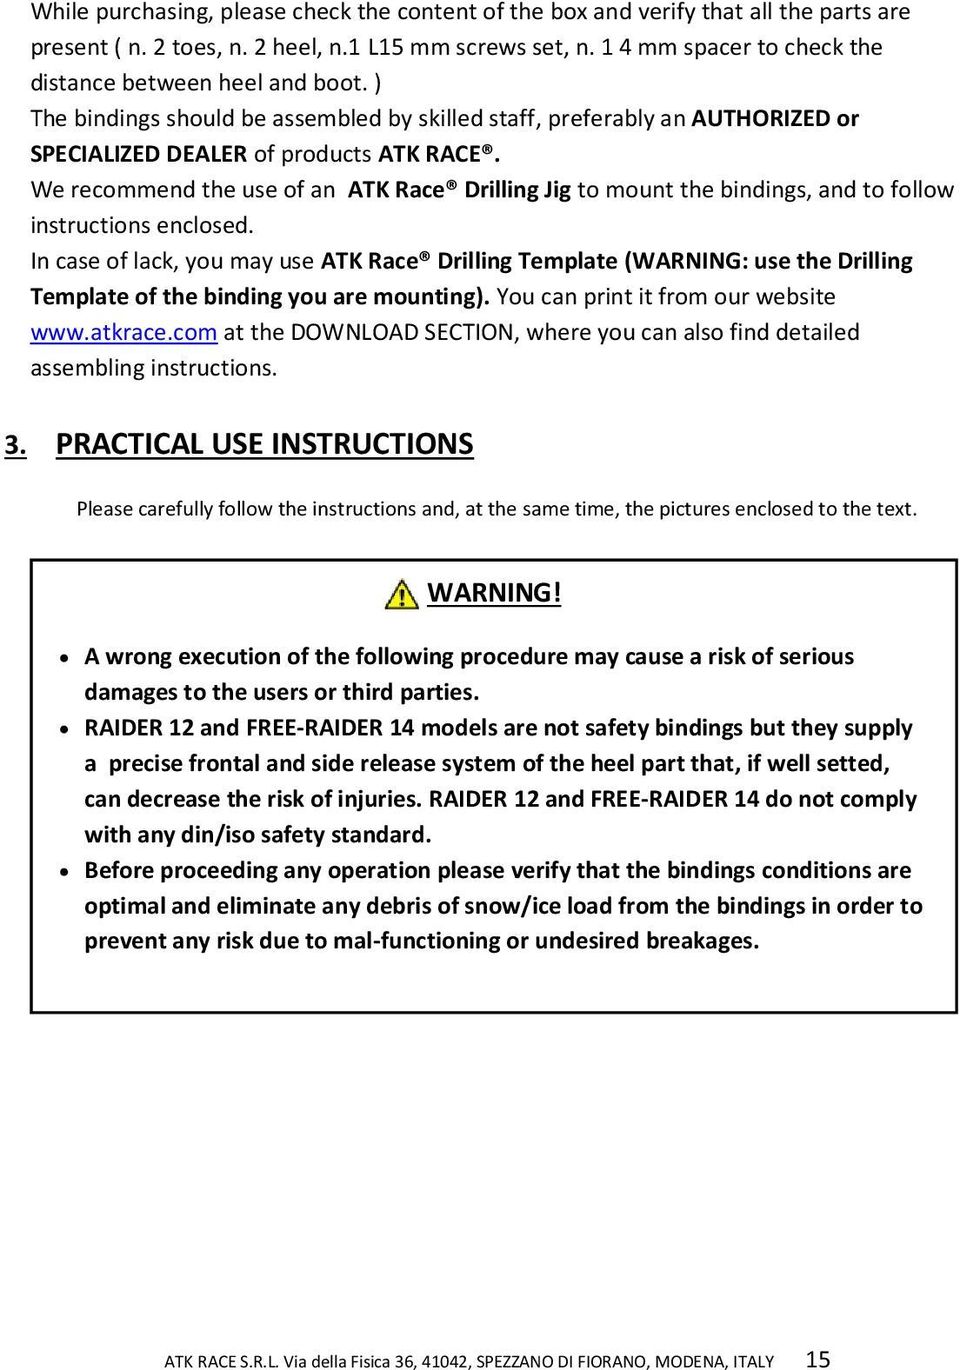 We recommend the use of an ATK Race Drilling Jig to mount the bindings, and to follow instructions enclosed.